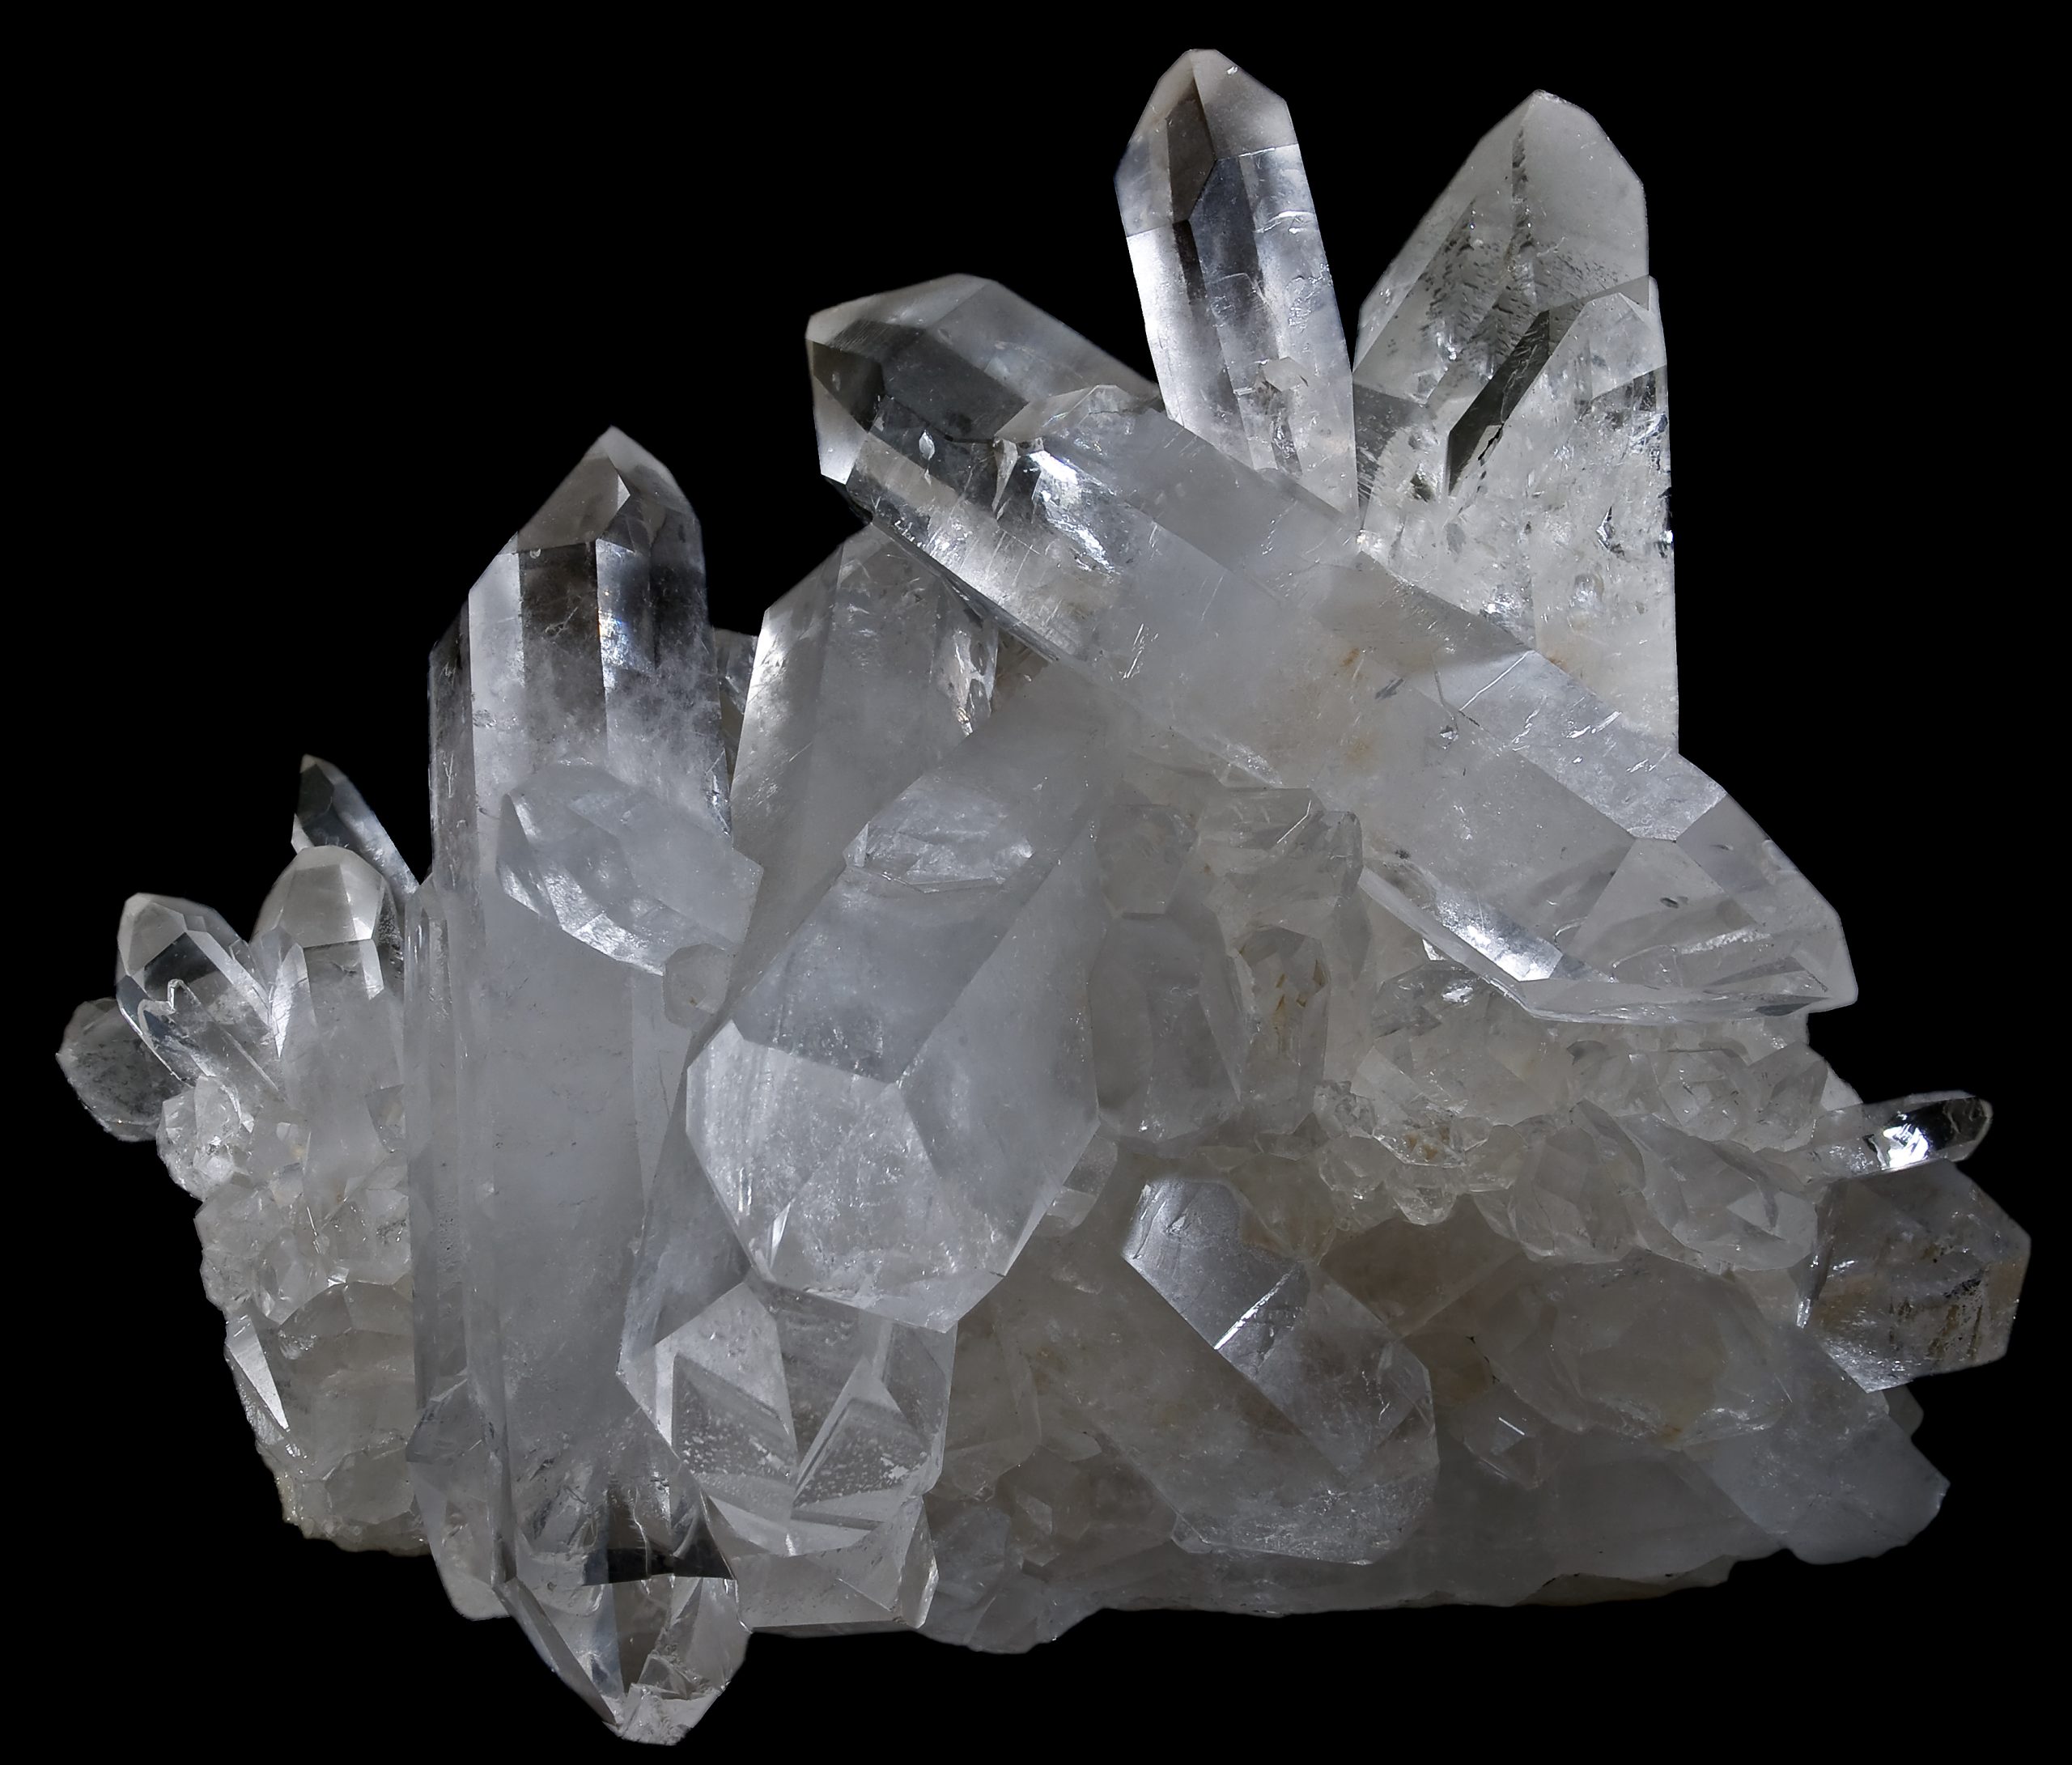 Non-metallic luster in prismatic quartz with six-sided euhedral crystal form.